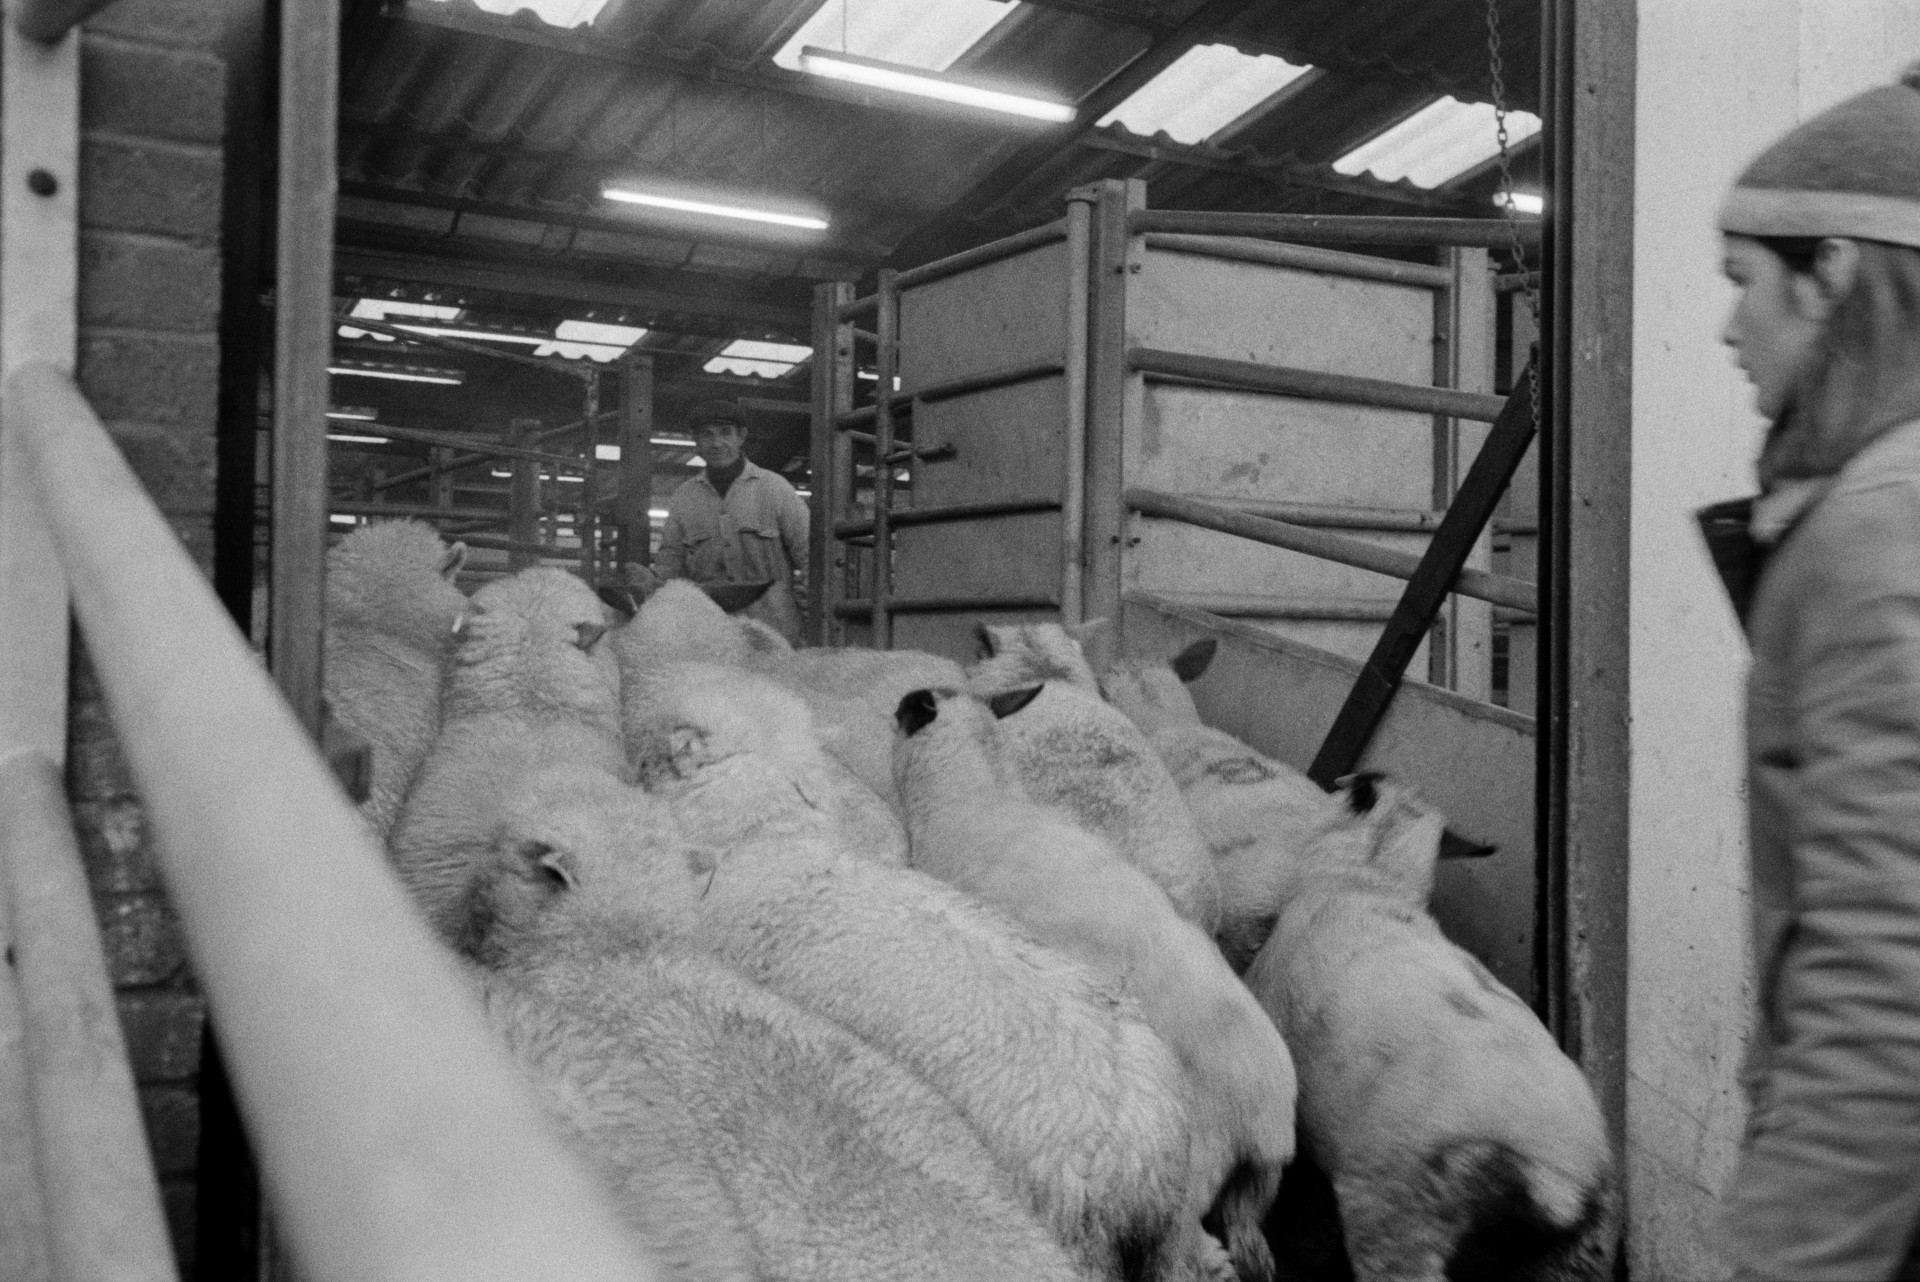 Derek Bright unloading sheep to be slaughtered at the North Devon Meat Company in Torrington.